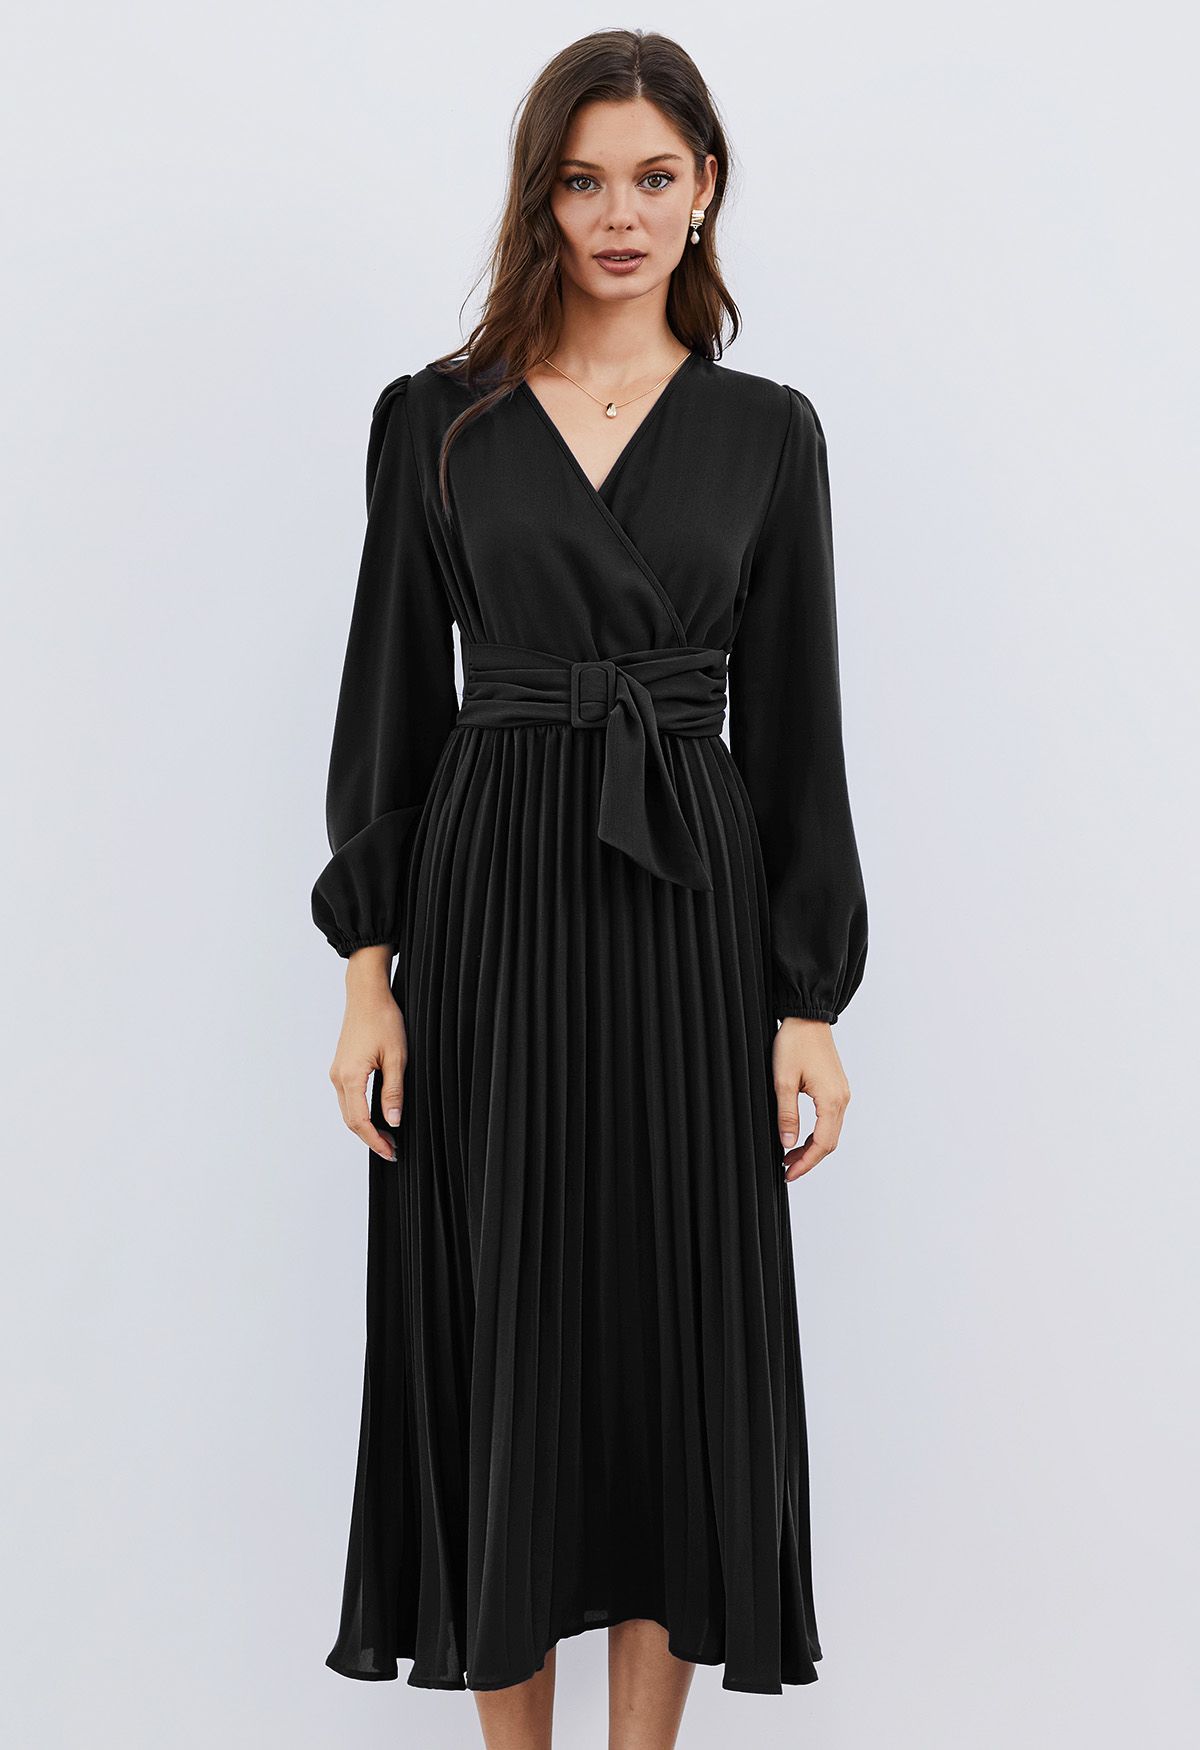 Wrap Front Buckle Belt Dress in Black - Retro, Indie and Unique Fashion